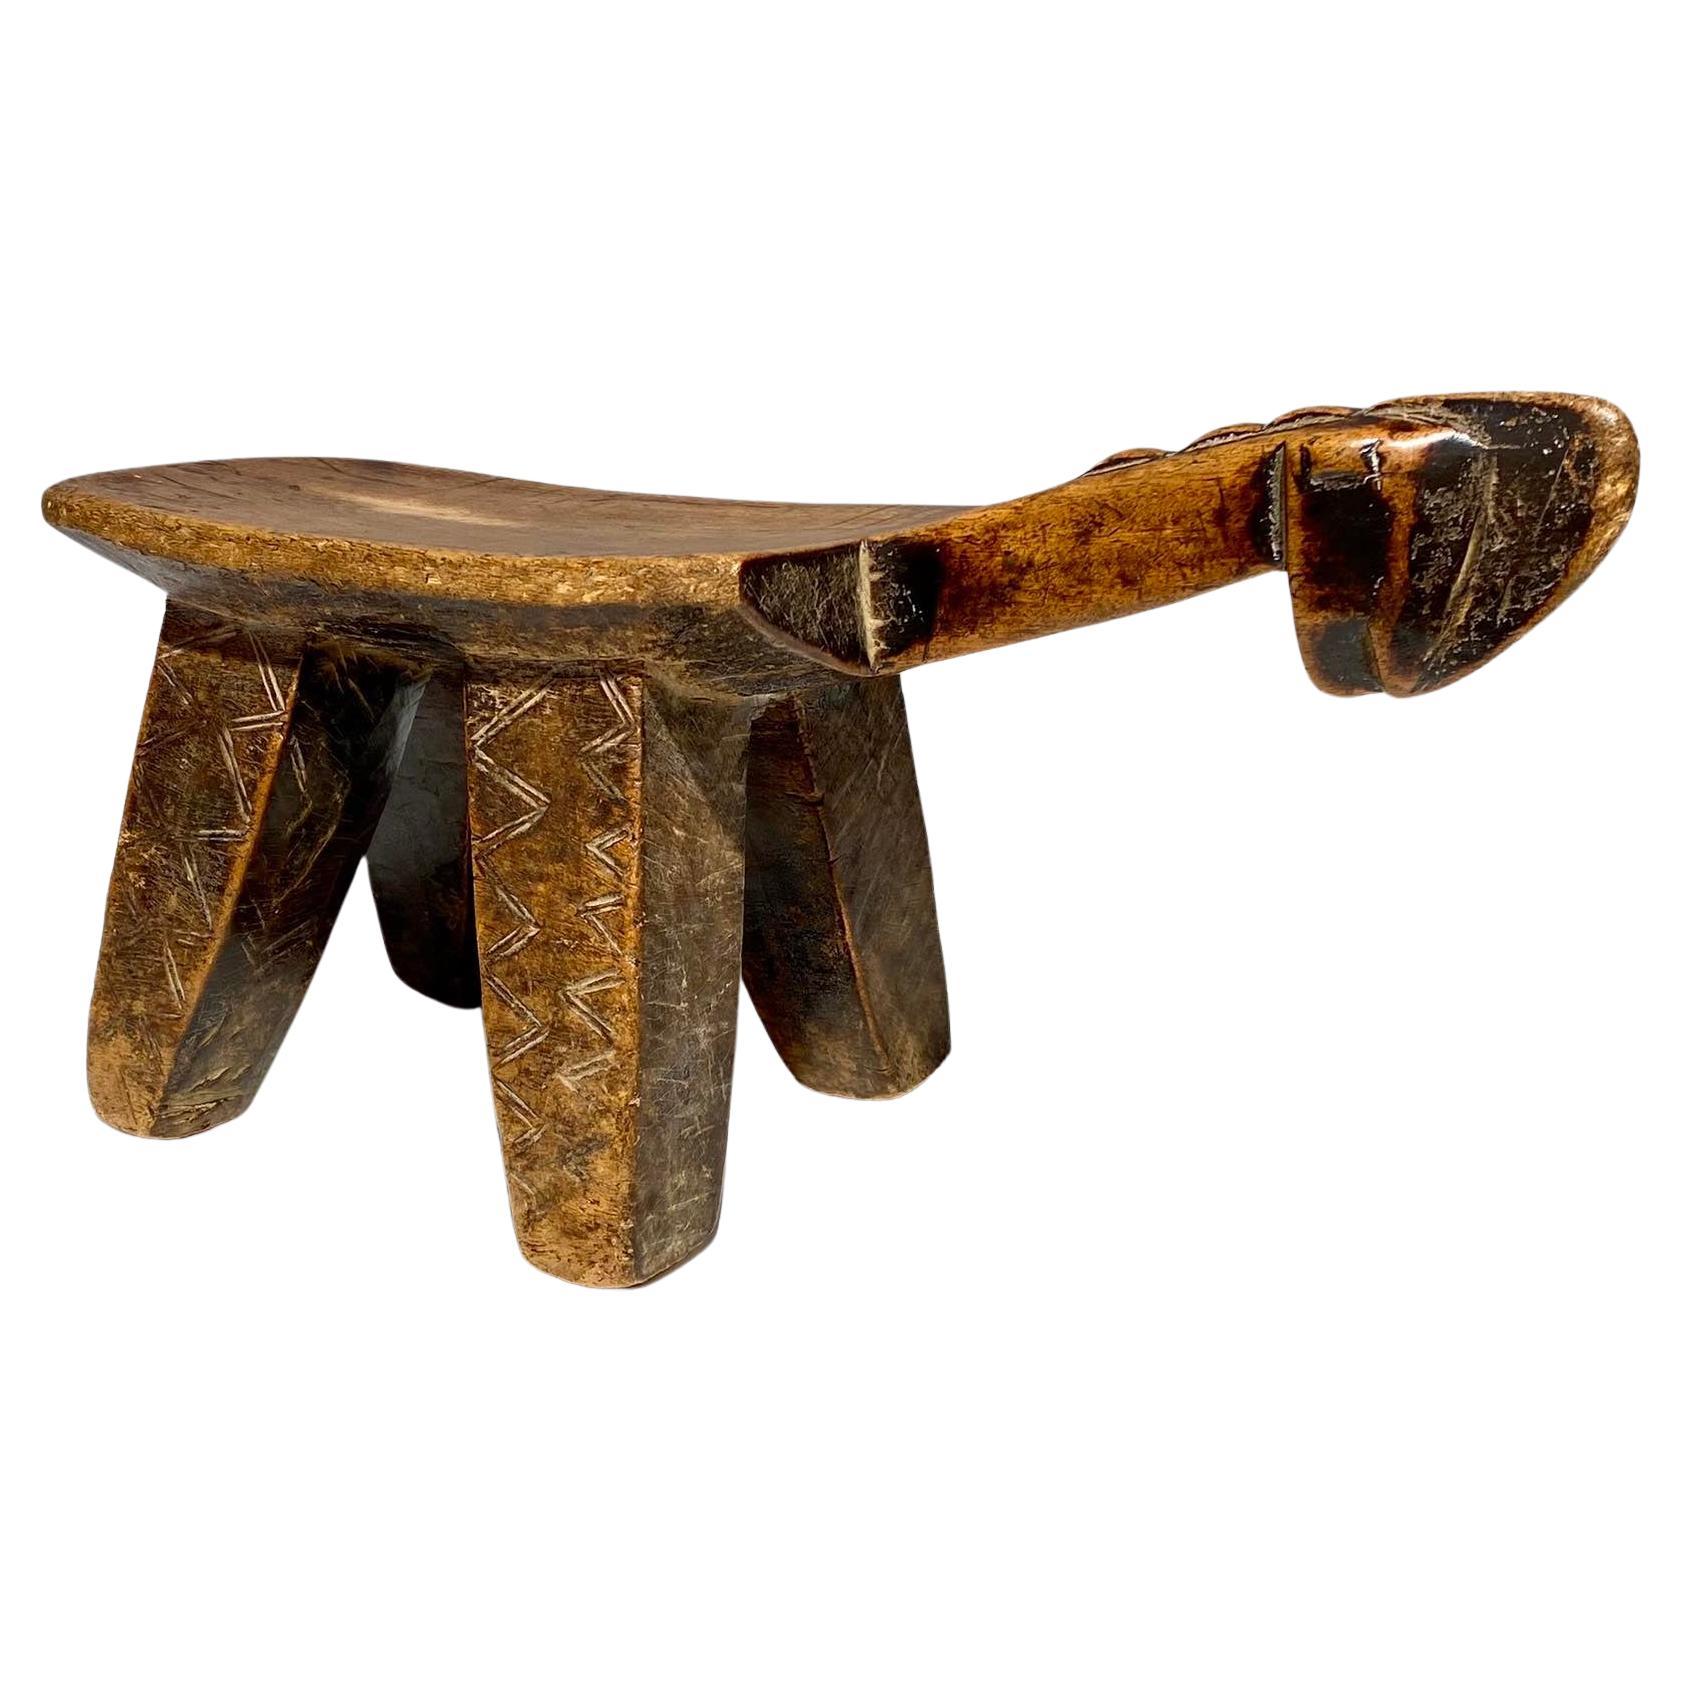 Antique superb rare Lobi or Bwa stool Burkina Faso / Mali region

Available at Art Gallery Decoster Belgium

Tribe : Bwa or Lobi
Country : Burkina Faso / Mali
Late 19th / Early 20th century
Length : 35 cm
Perfect condition / exceptional